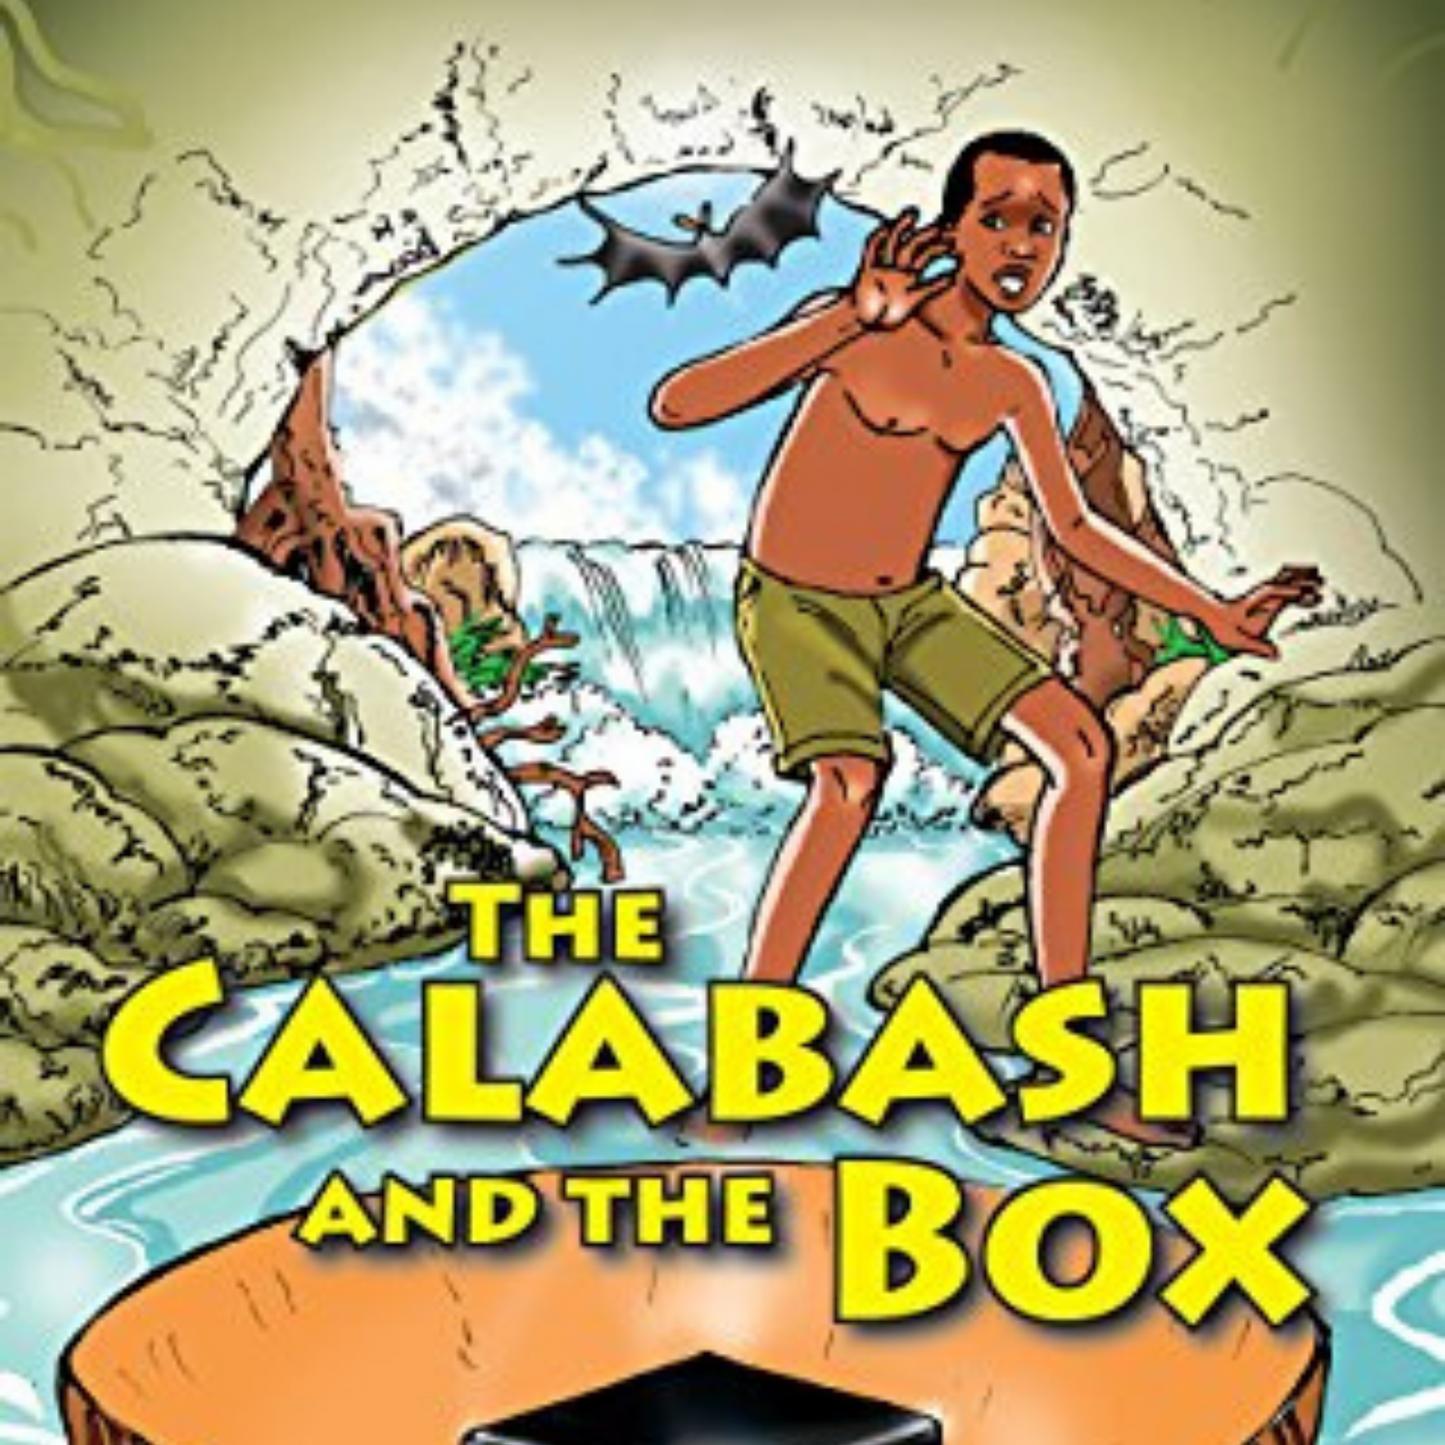 The Calabash and the Box